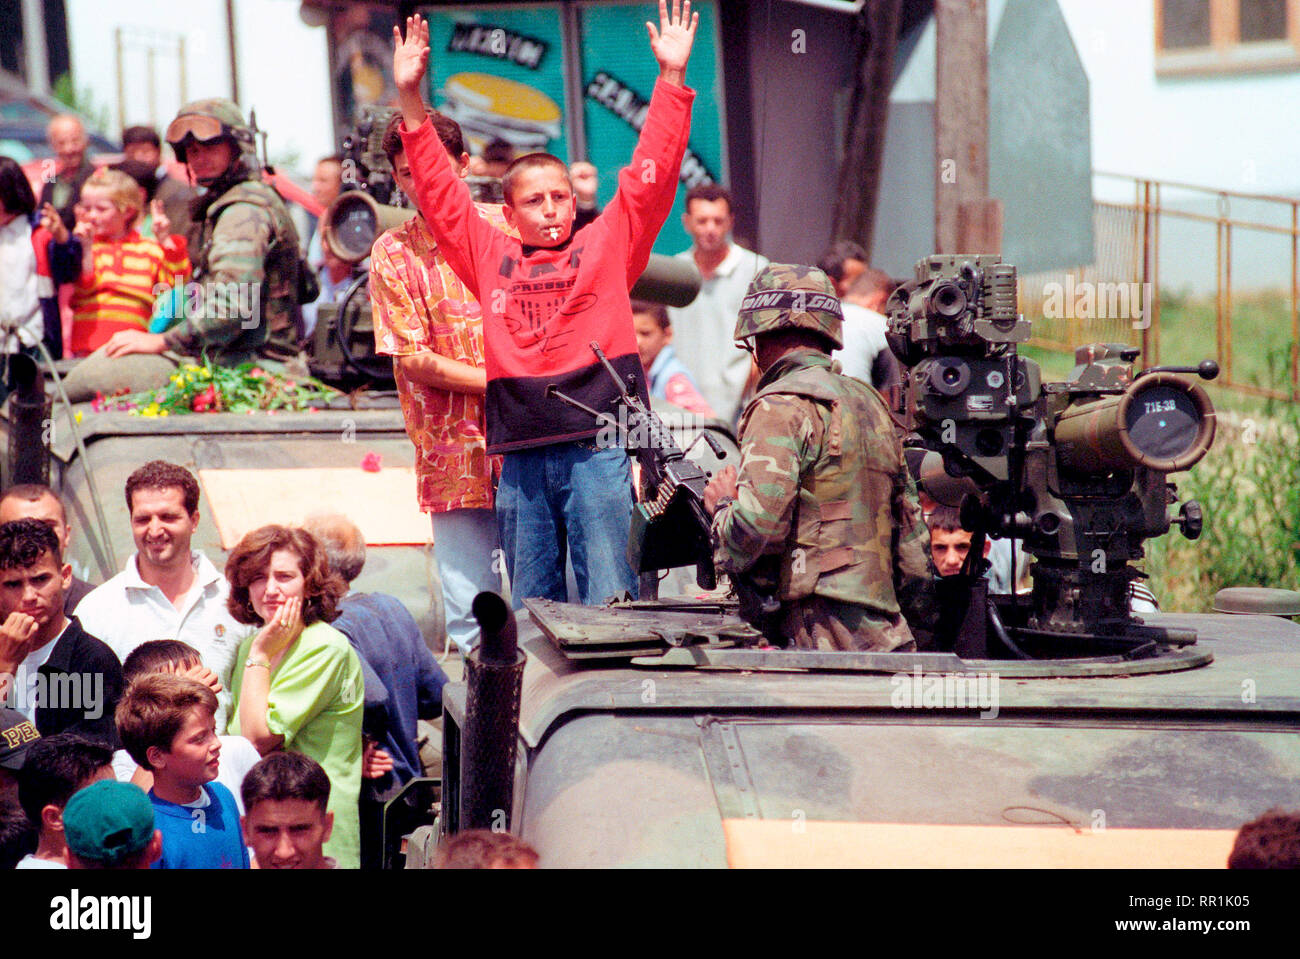 1999 - Ethenic Albanians gather in the streets for a parade held to honor American Forces in the Kosovo village of Koretin.  Kids climb on top of an M998 High-Mobility Multipurpose Wheeled Vehicle (HMMWV) with TOW missile. Stock Photo